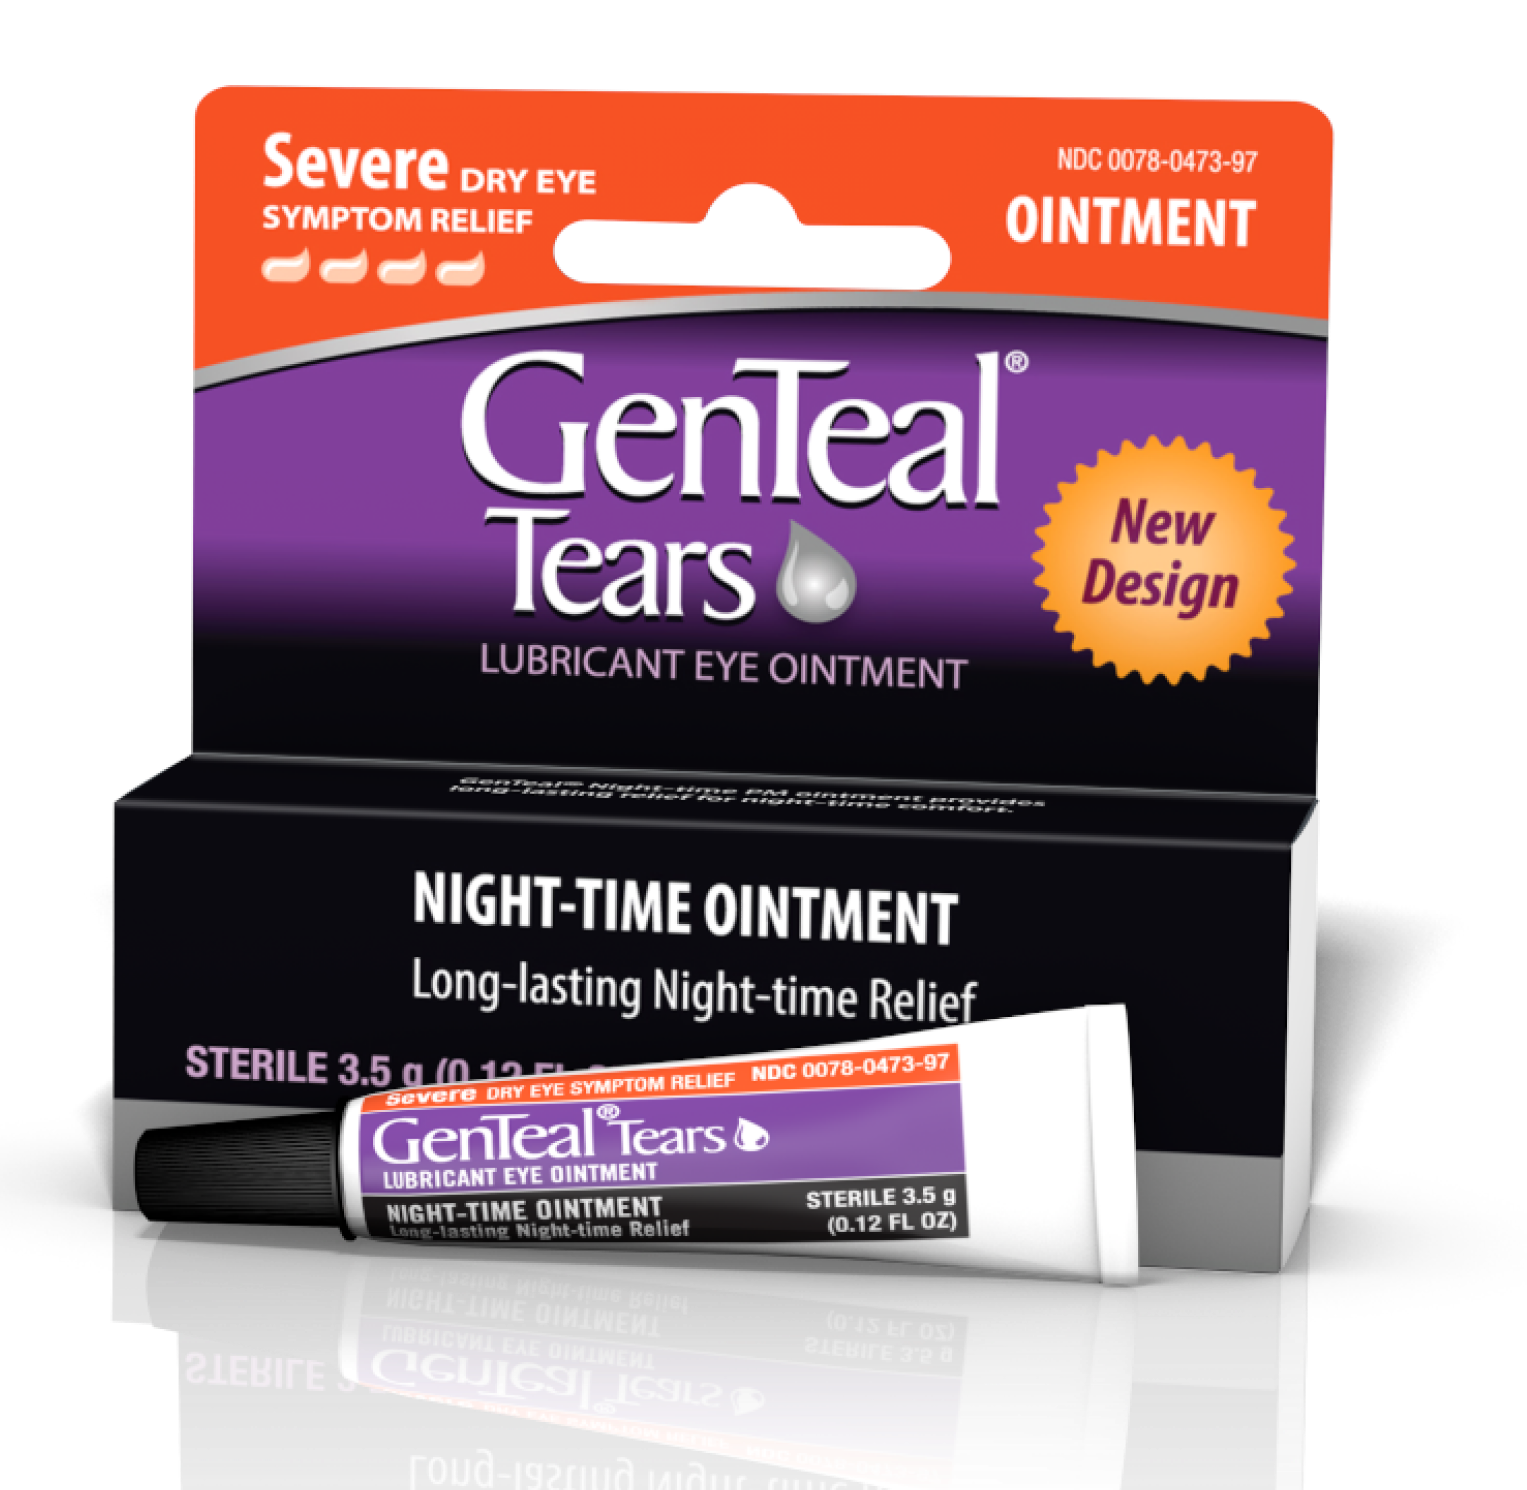 GenTeal Tears Box and Ointment Vial